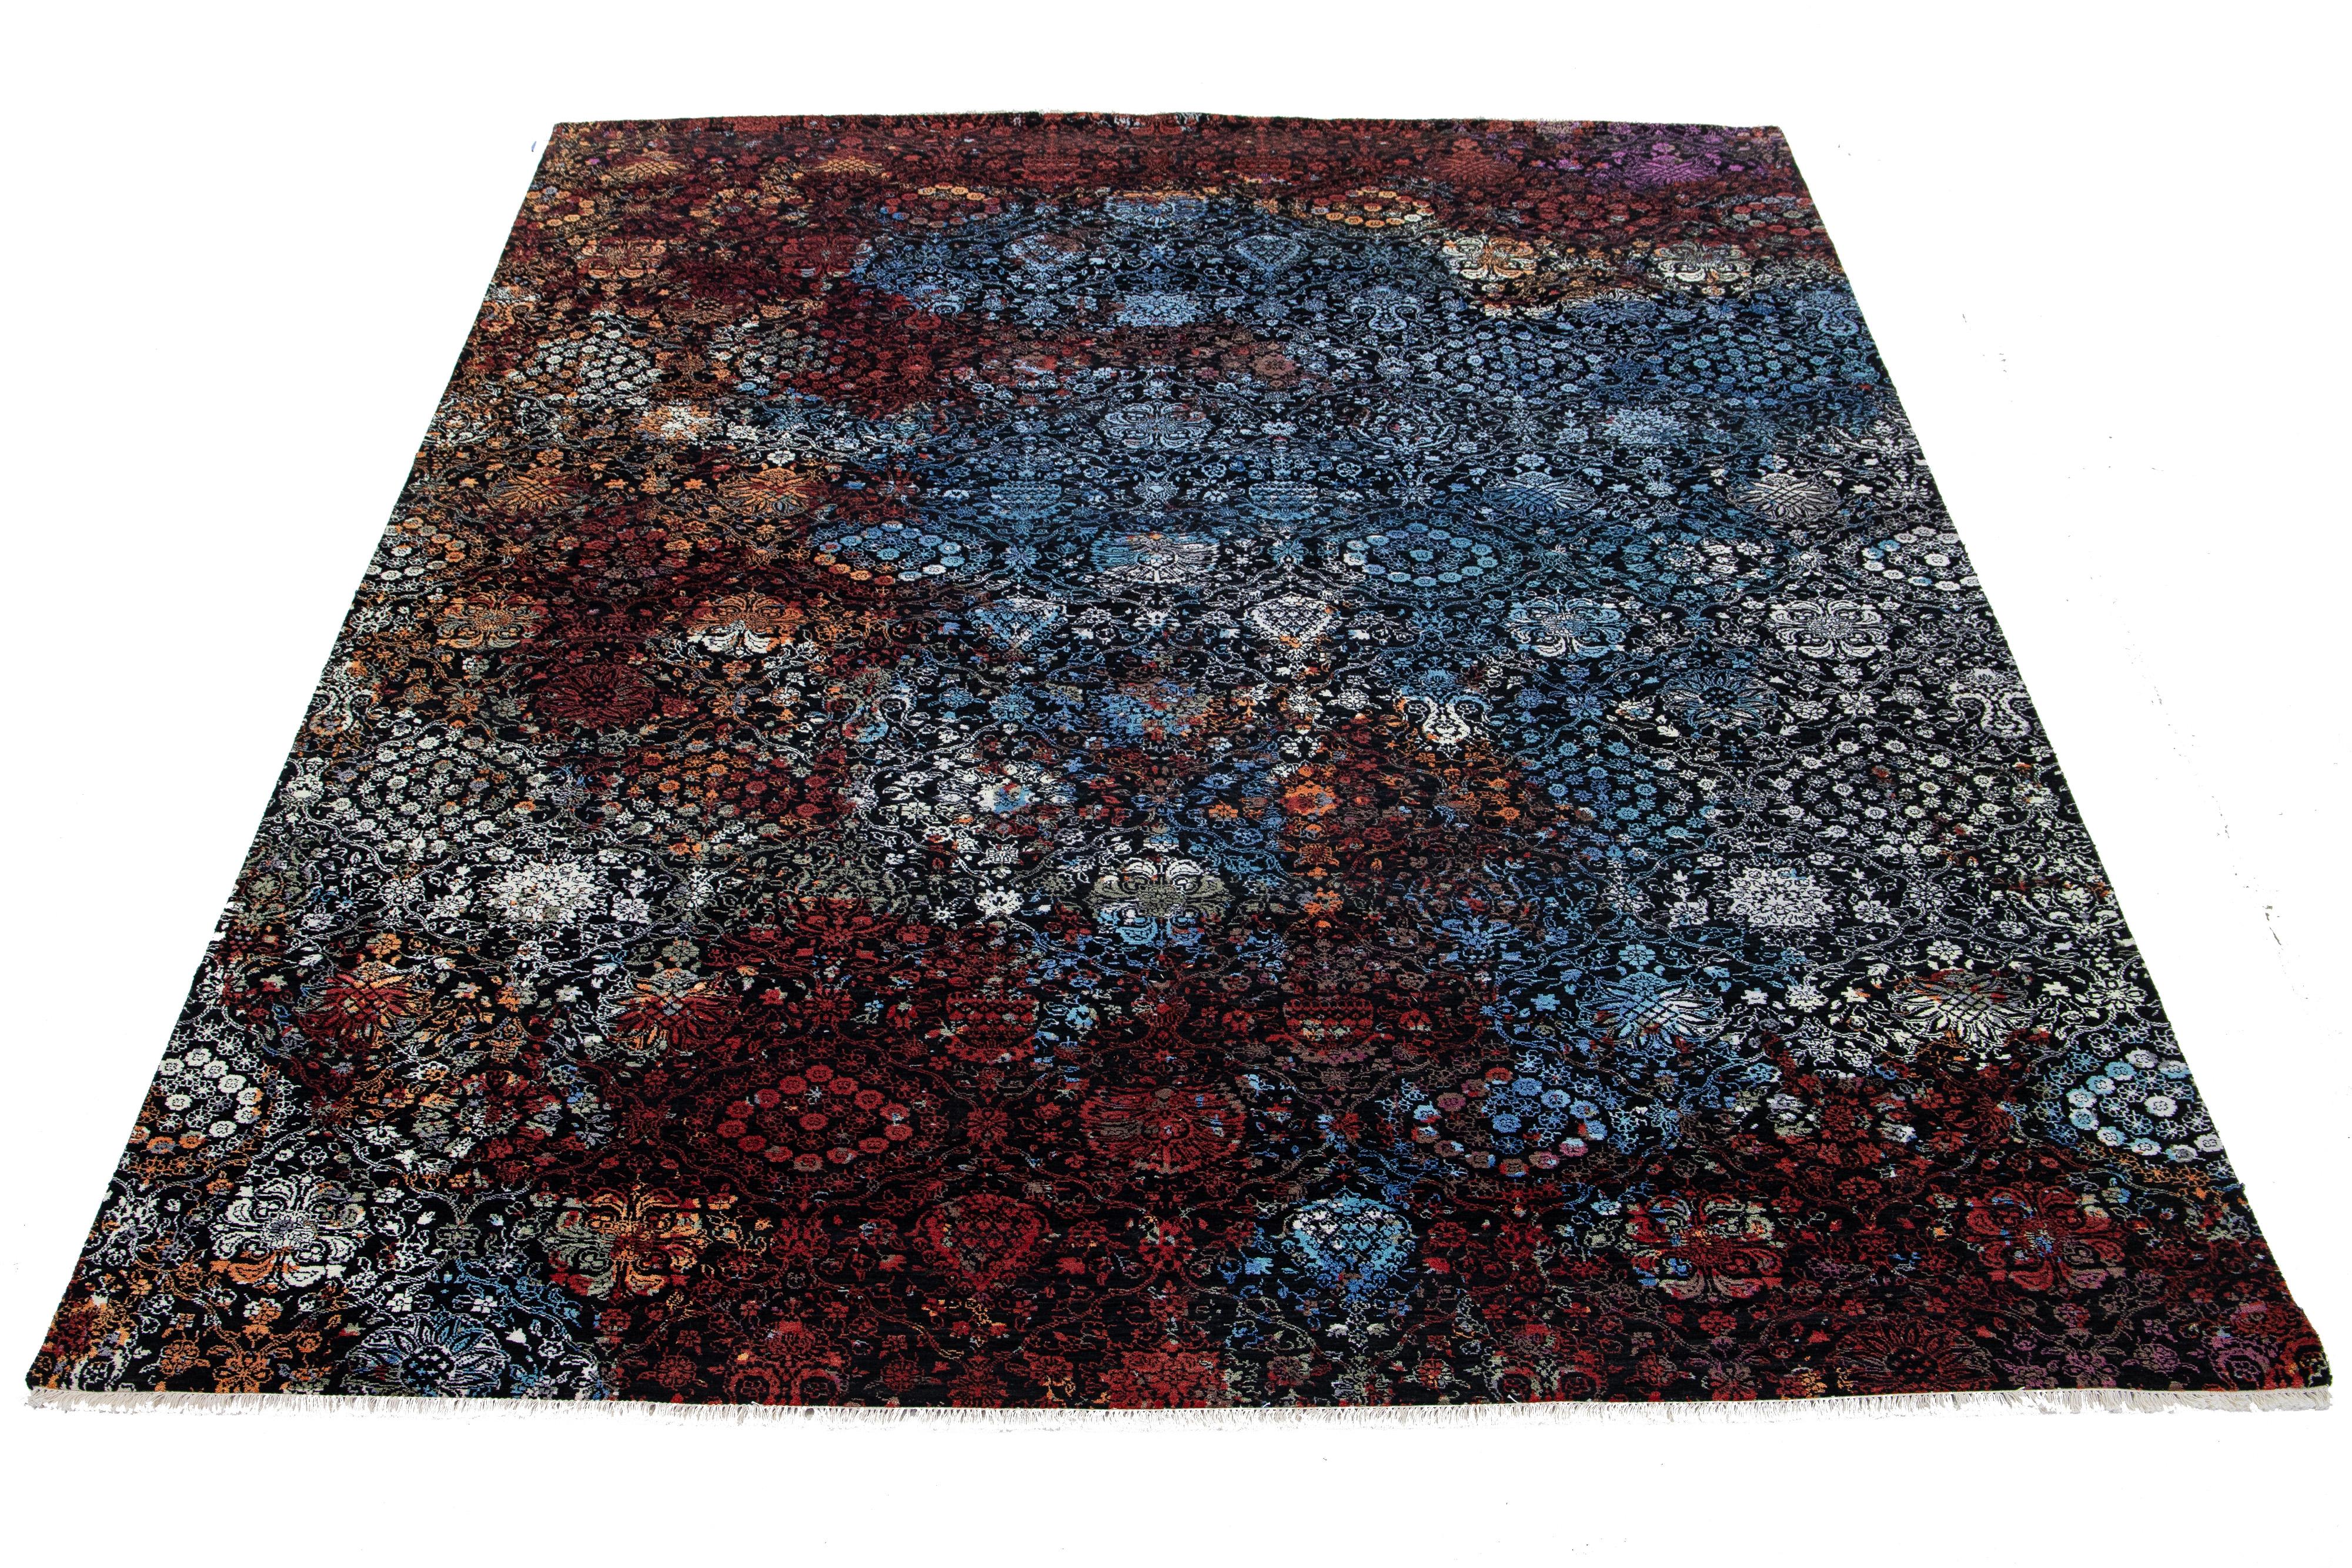 This hand-knotted wool rug showcases a black field. It's designed with a stunning floral pattern and accented with white, red, orange, and blue hues in a Transitional allure.

This rug measures 10'2